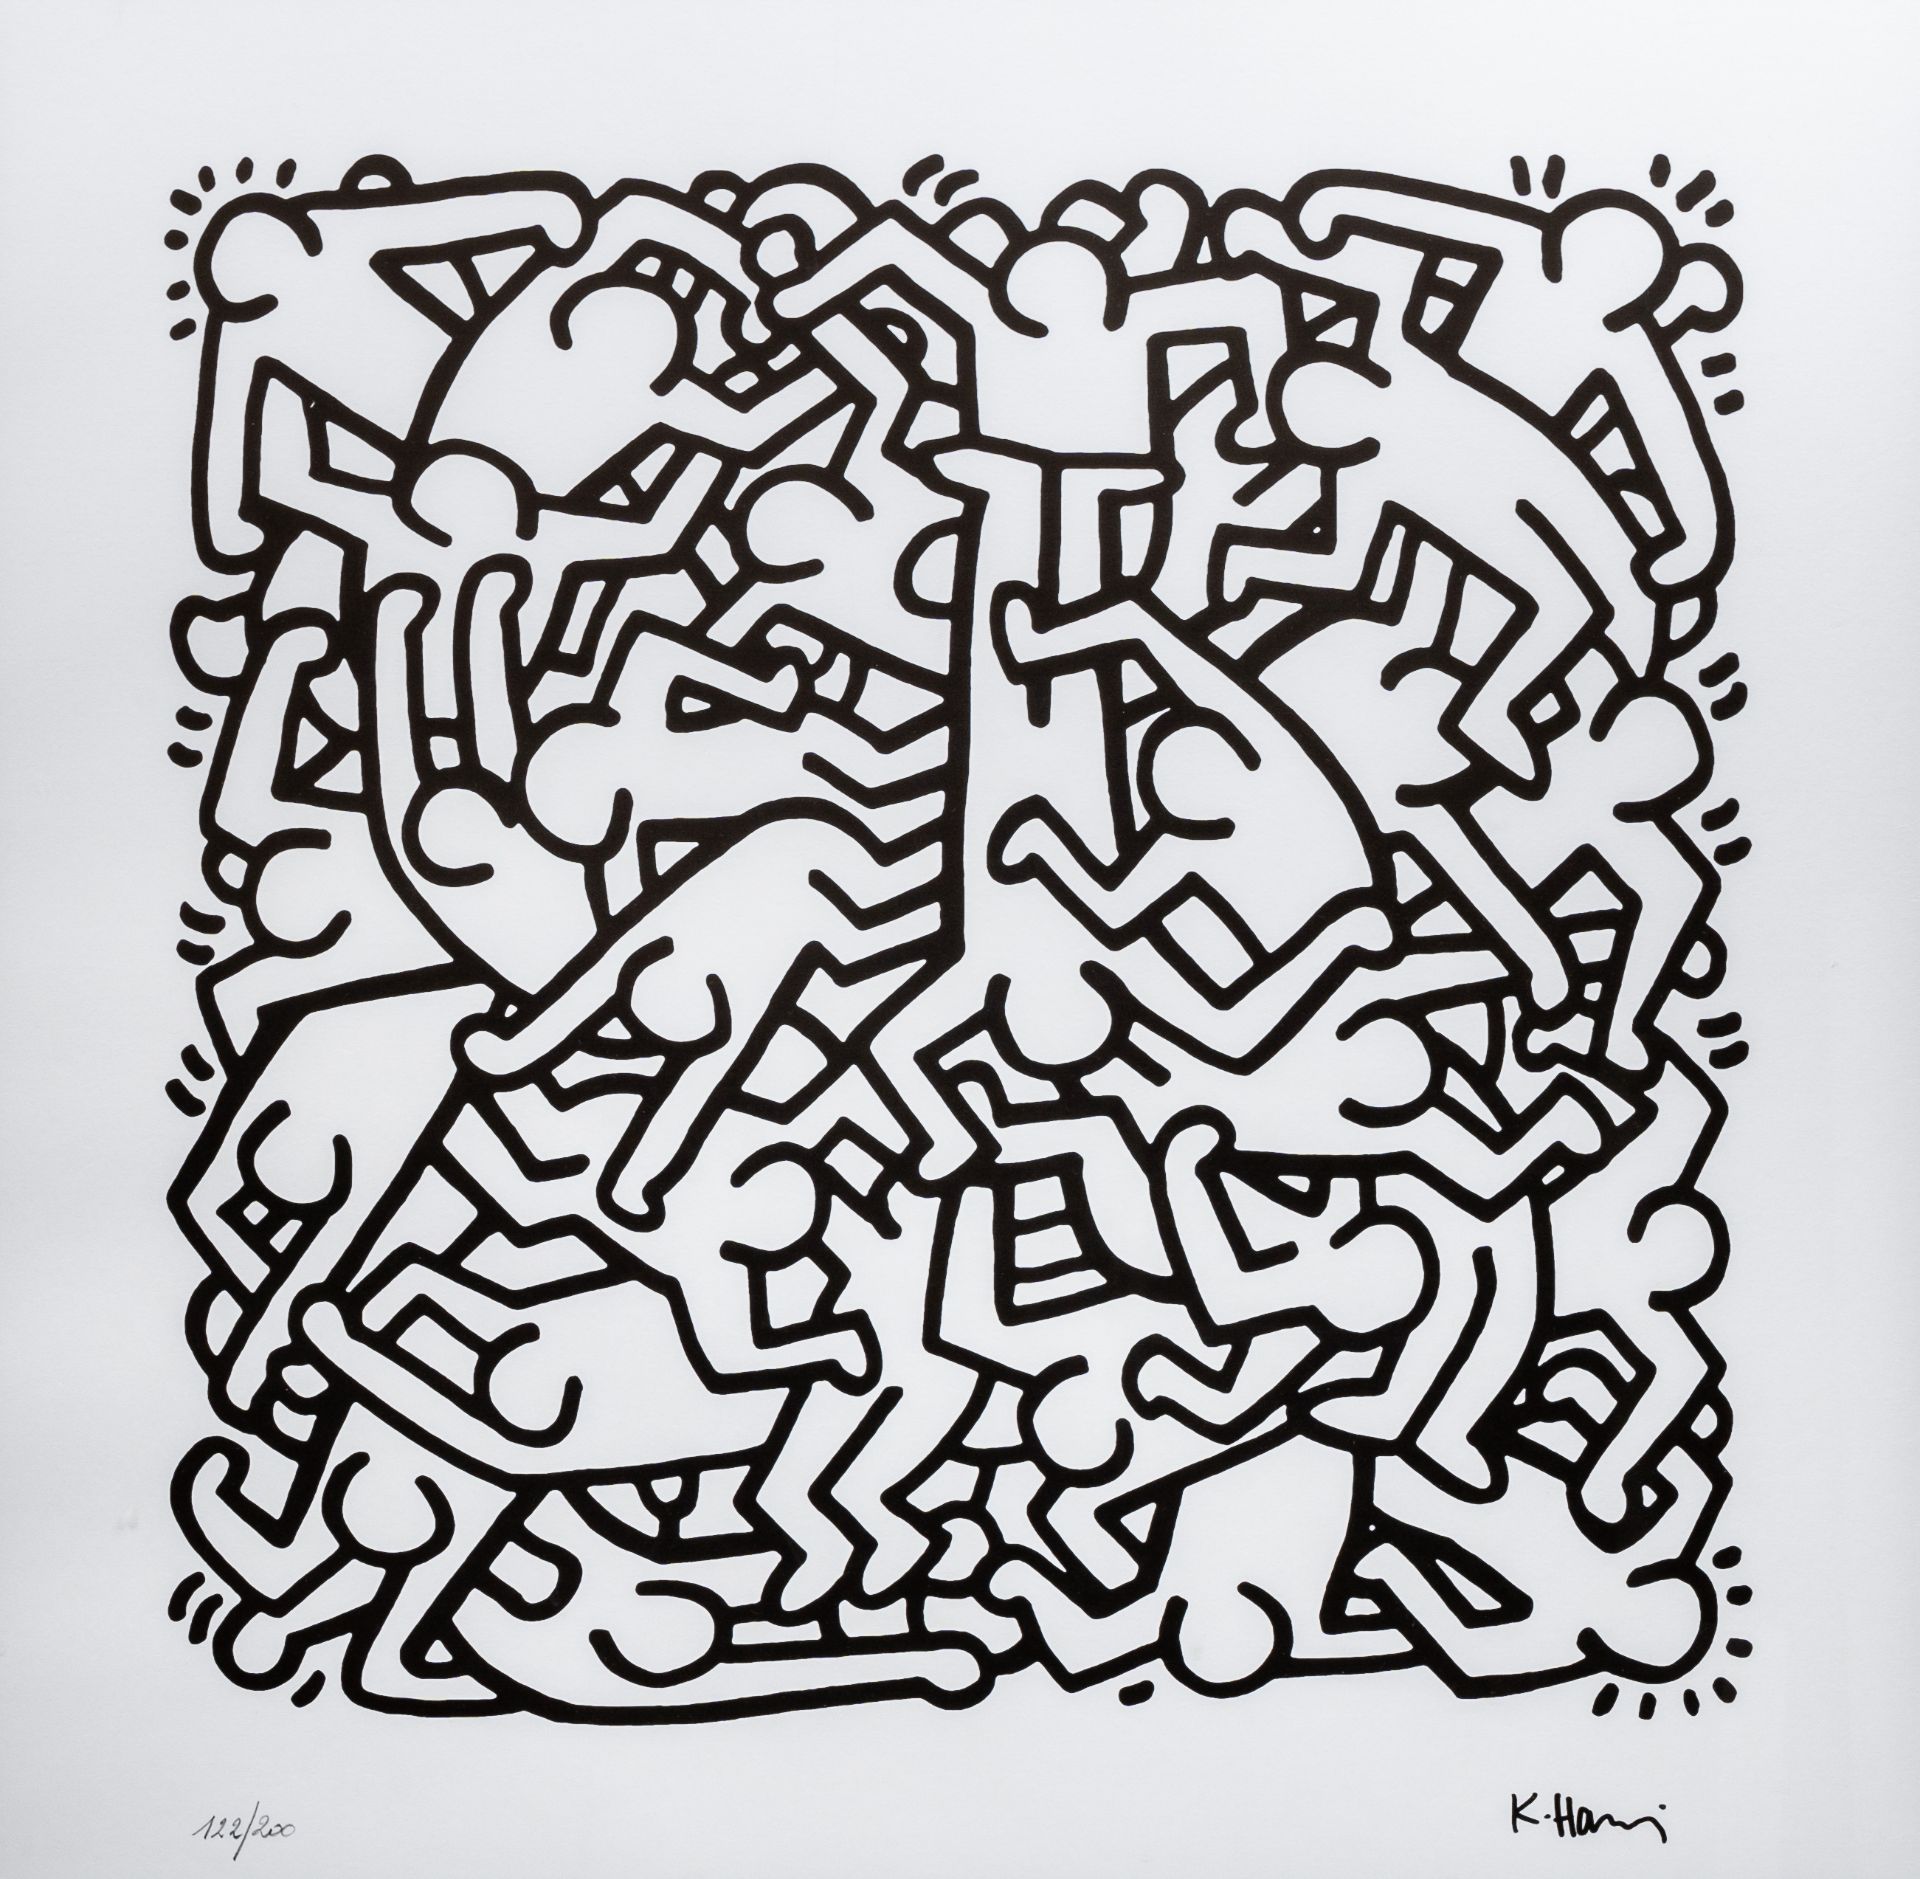 Keith Haring (1958-1990, after): 'Party of life invitation', serigraph, 122/200